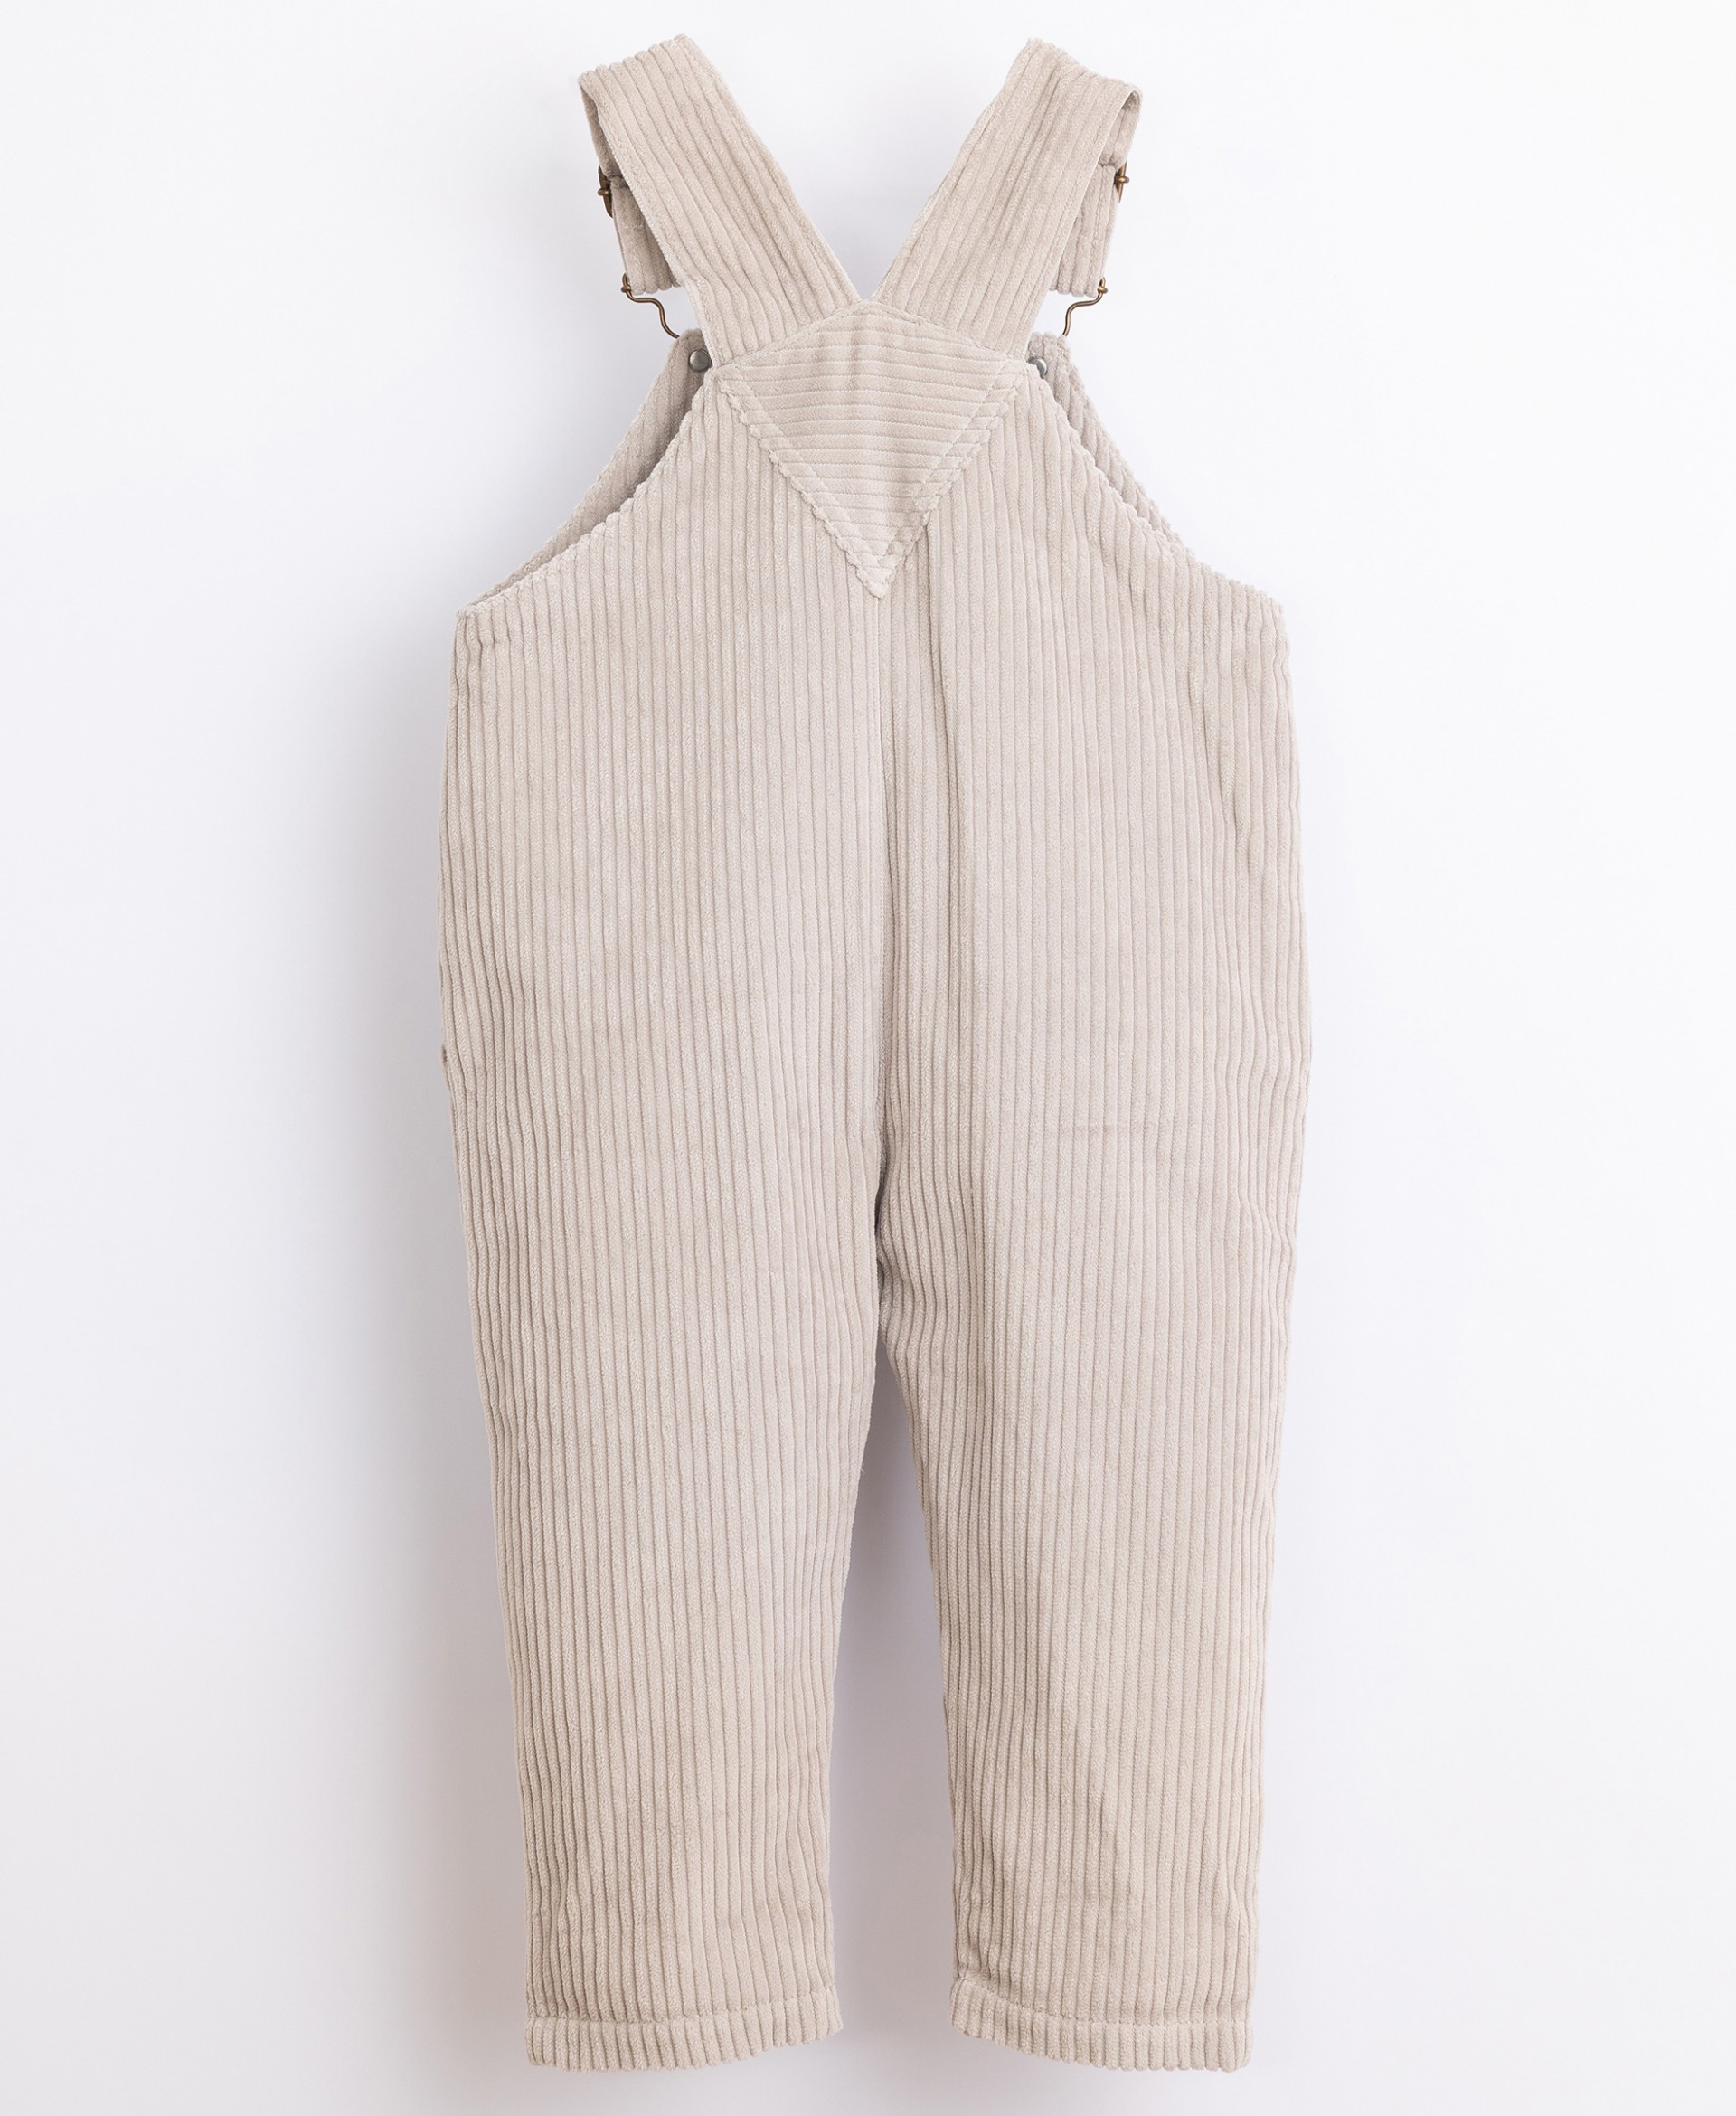 Corduroy dungarees with pockets | Illustration